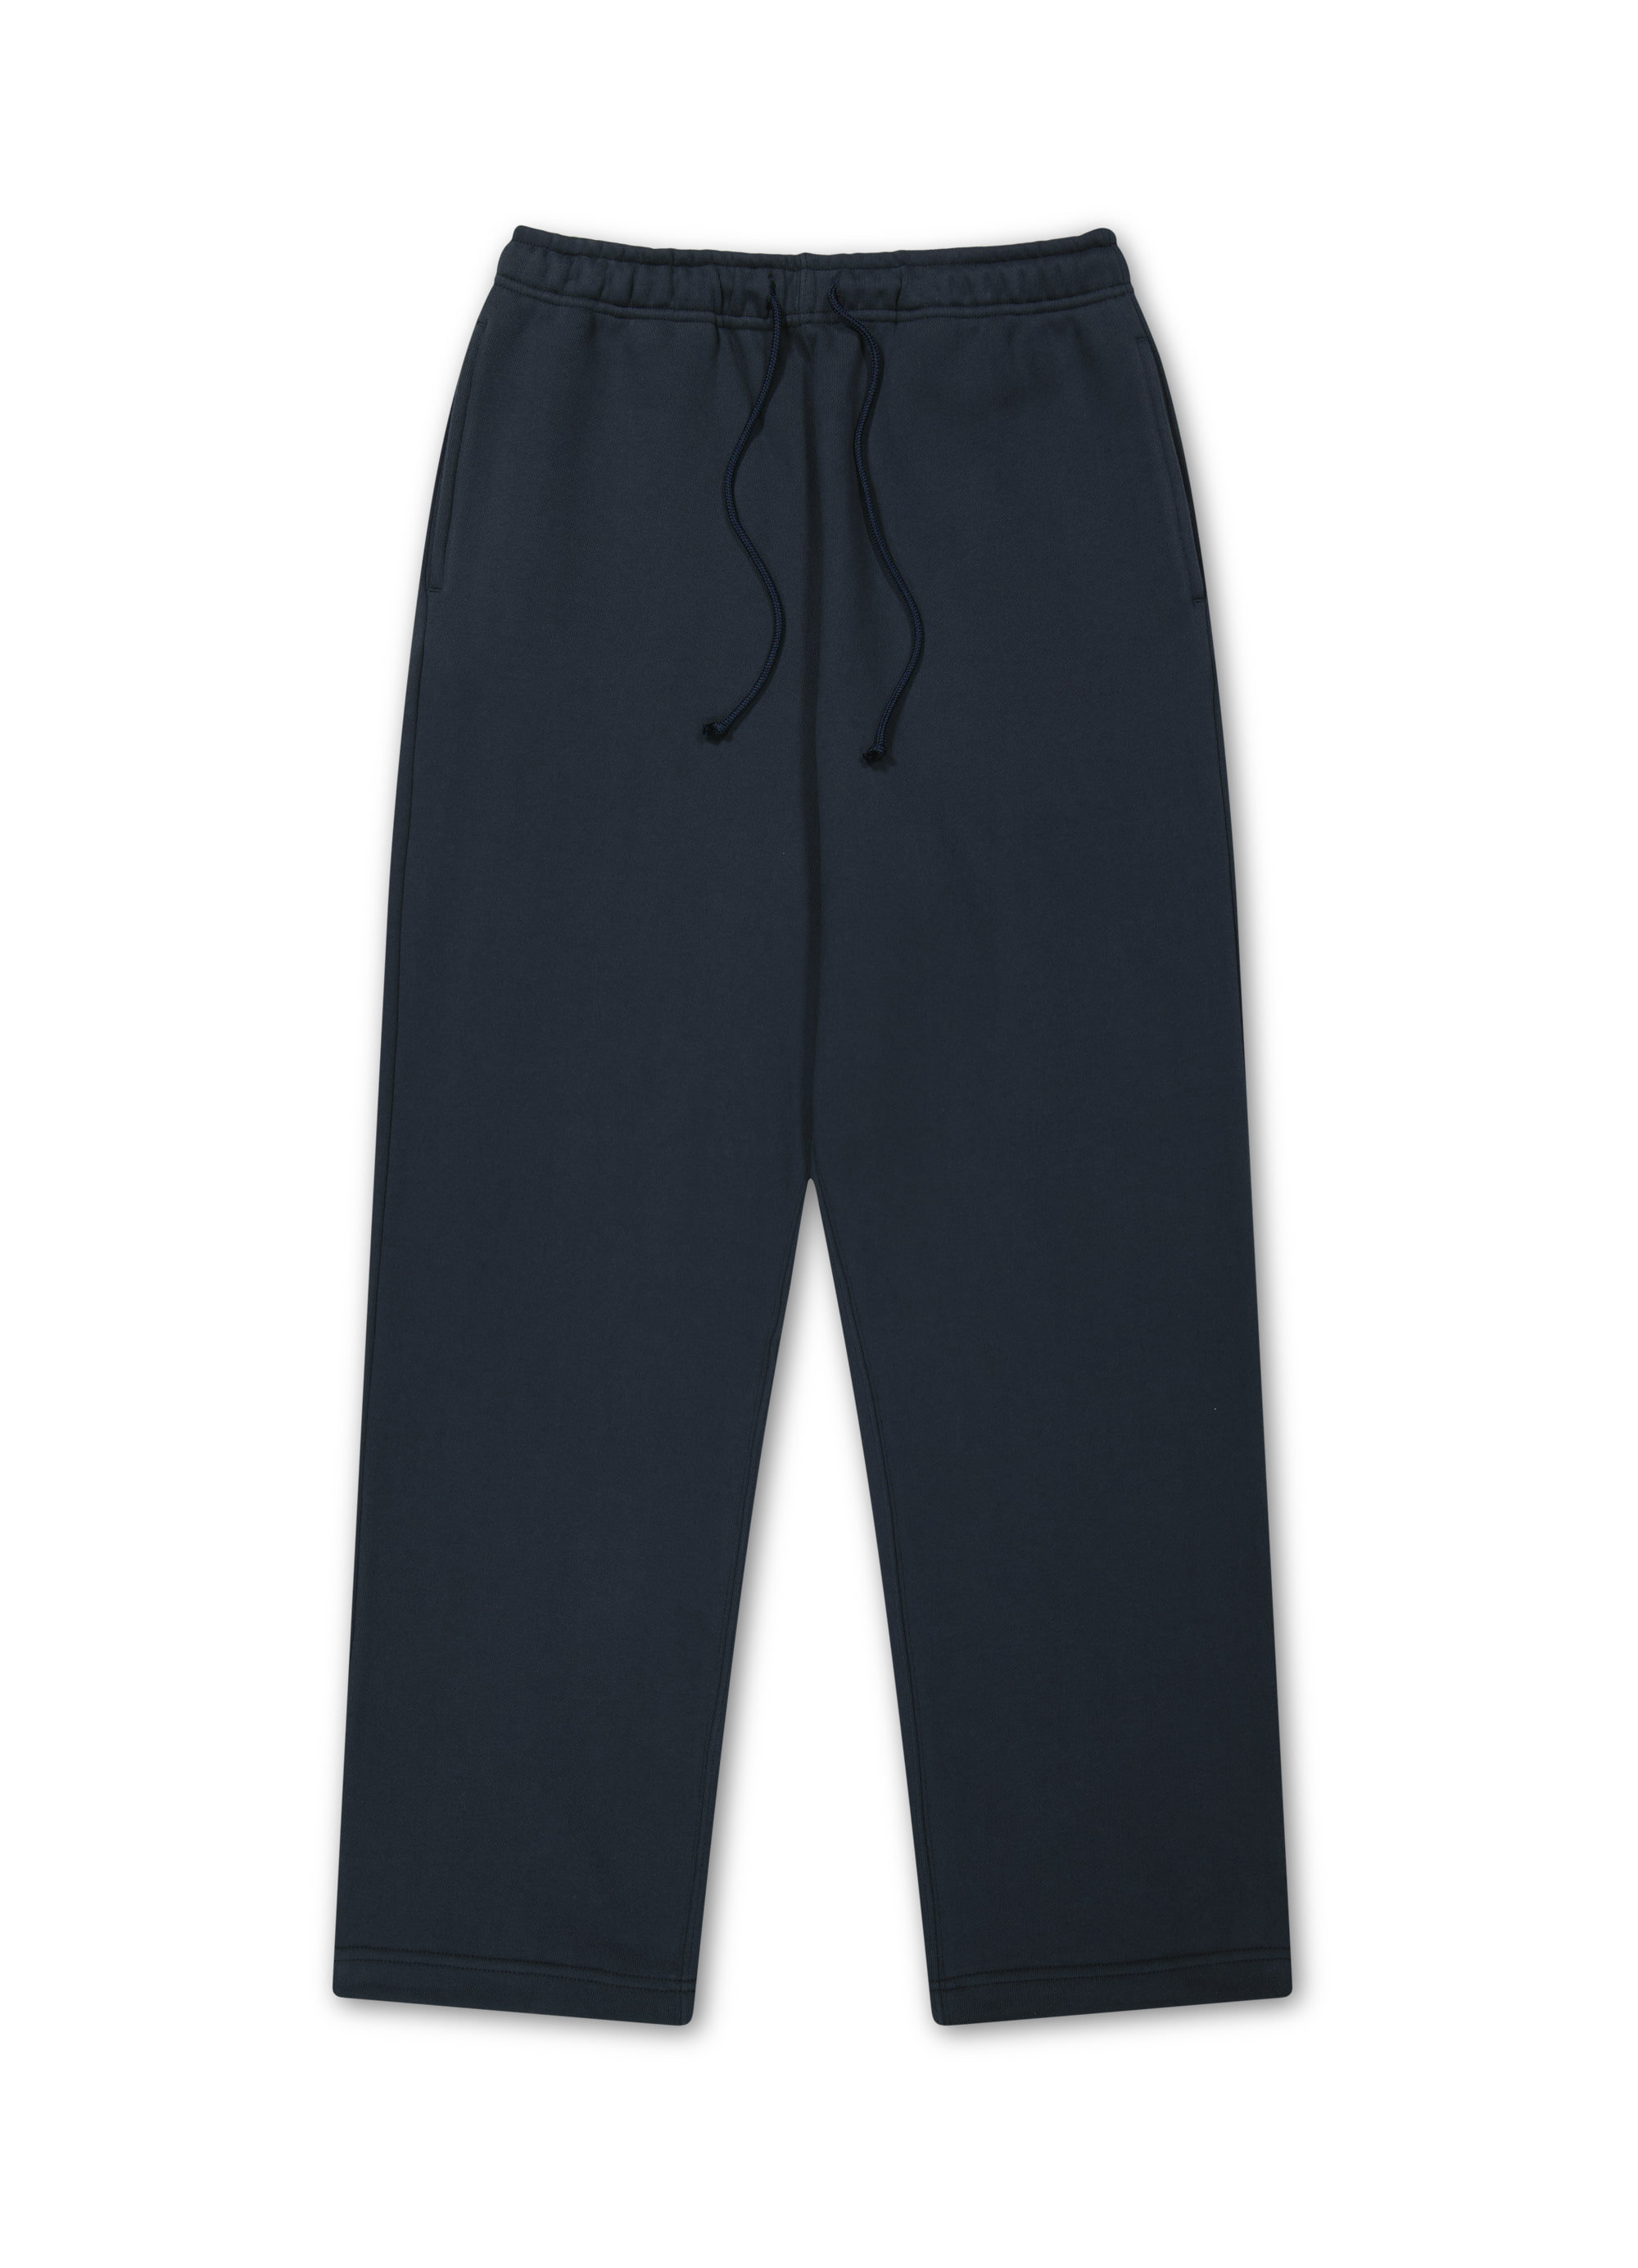 094 HEAVY WEIGHTED SWEATPANTS - NAVY